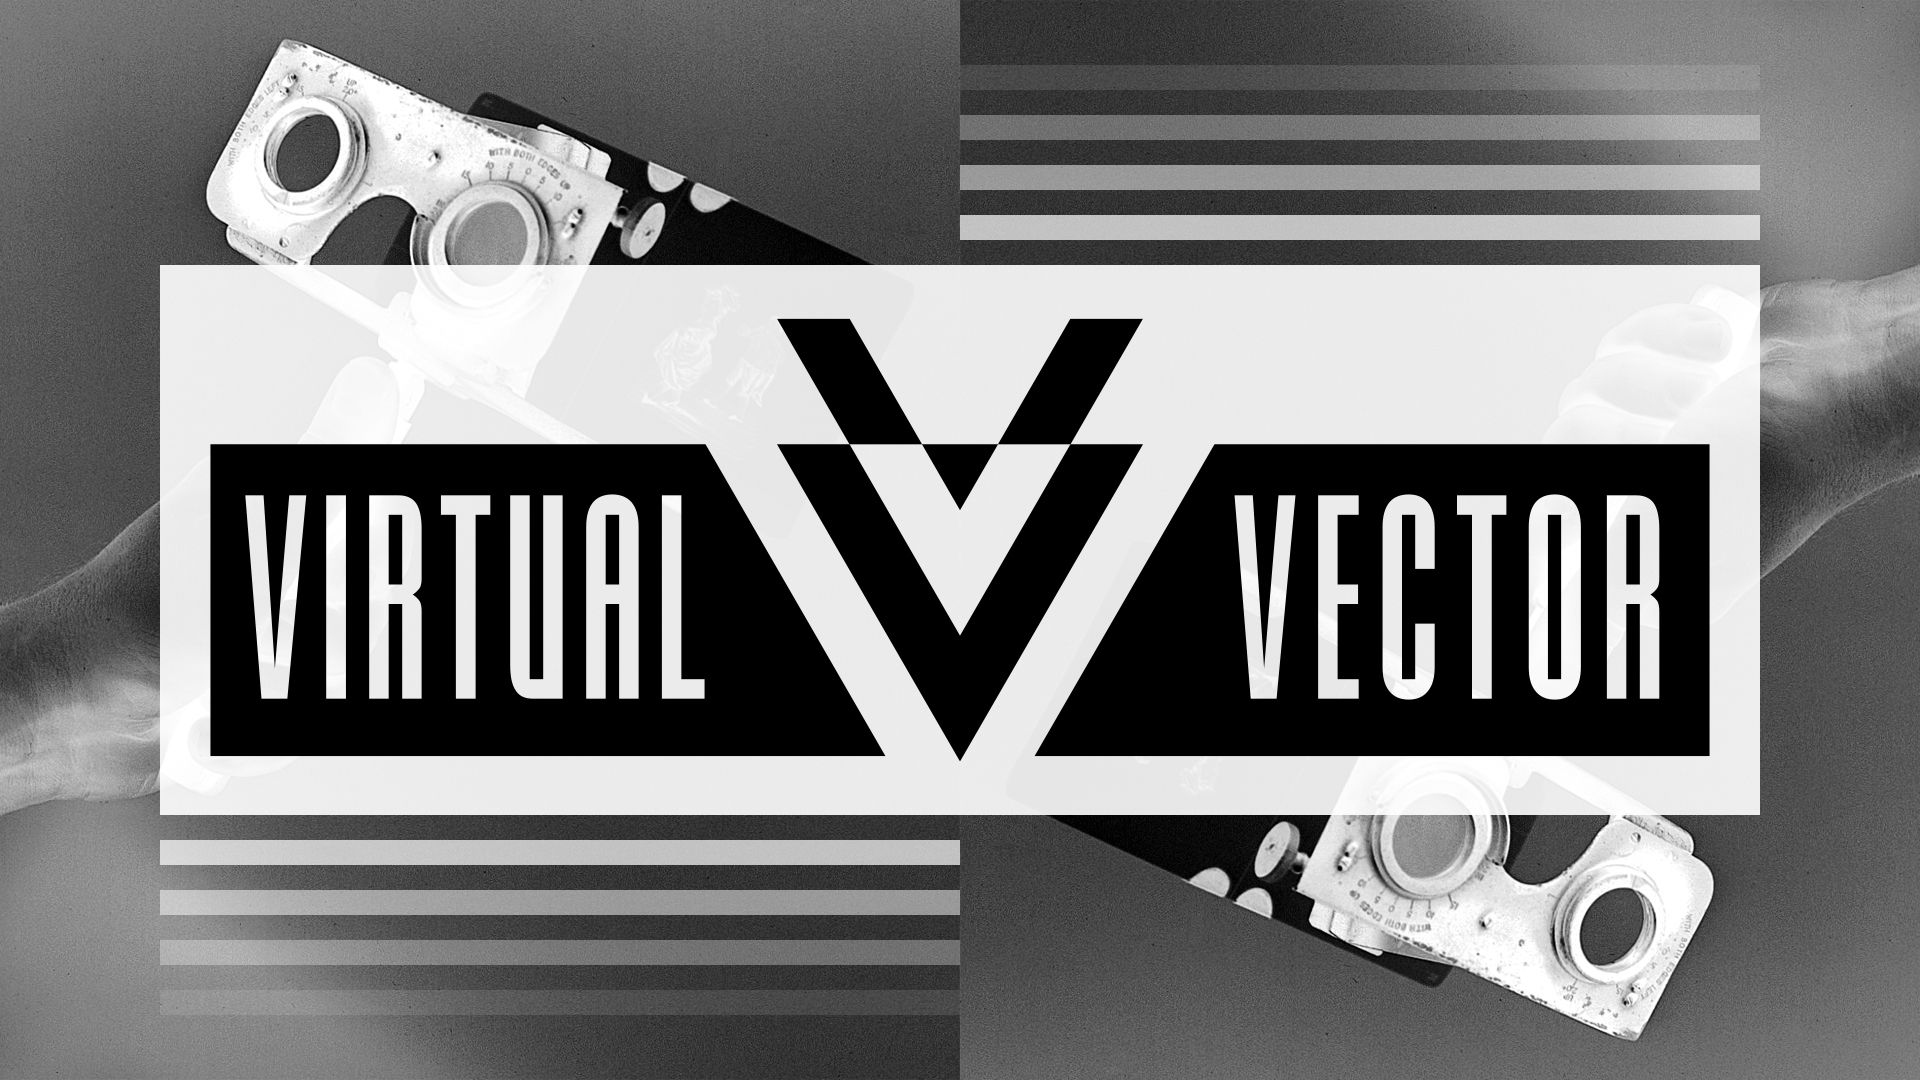 A header image: the Virtual Vector logo overlaid atop a collage of retouched stereoscope photos.